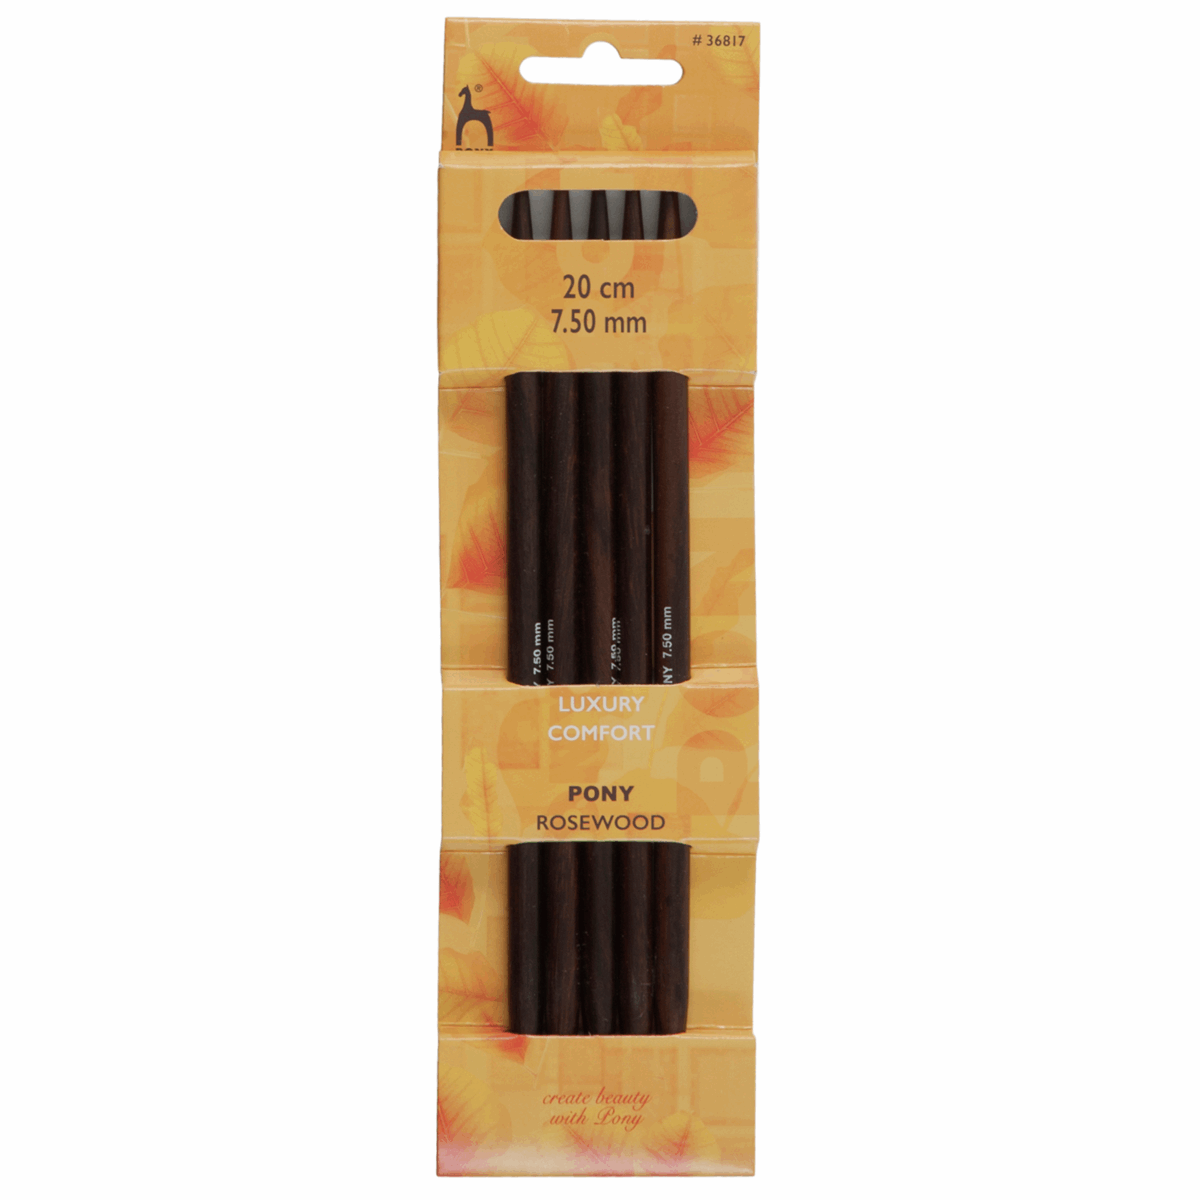 PONY 'Rosewood' Double-Ended Knitting Pins - 20cm x 7.50mm (Set of 5)